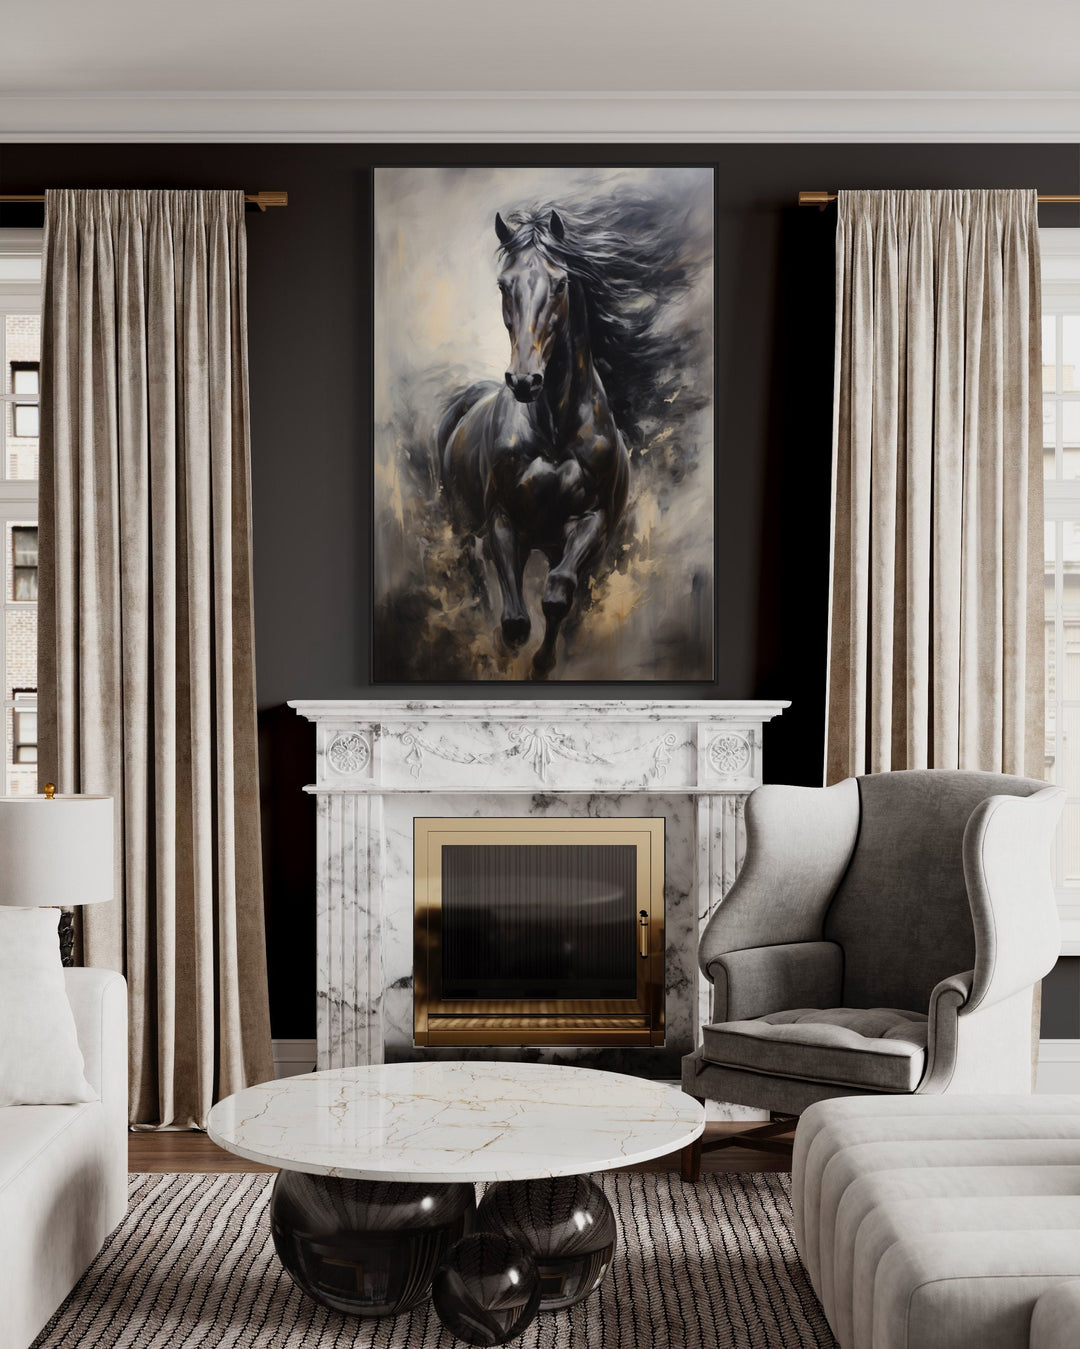 Black Horse Modern Abstract Painting Framed Canvas Wall Art above fireplace